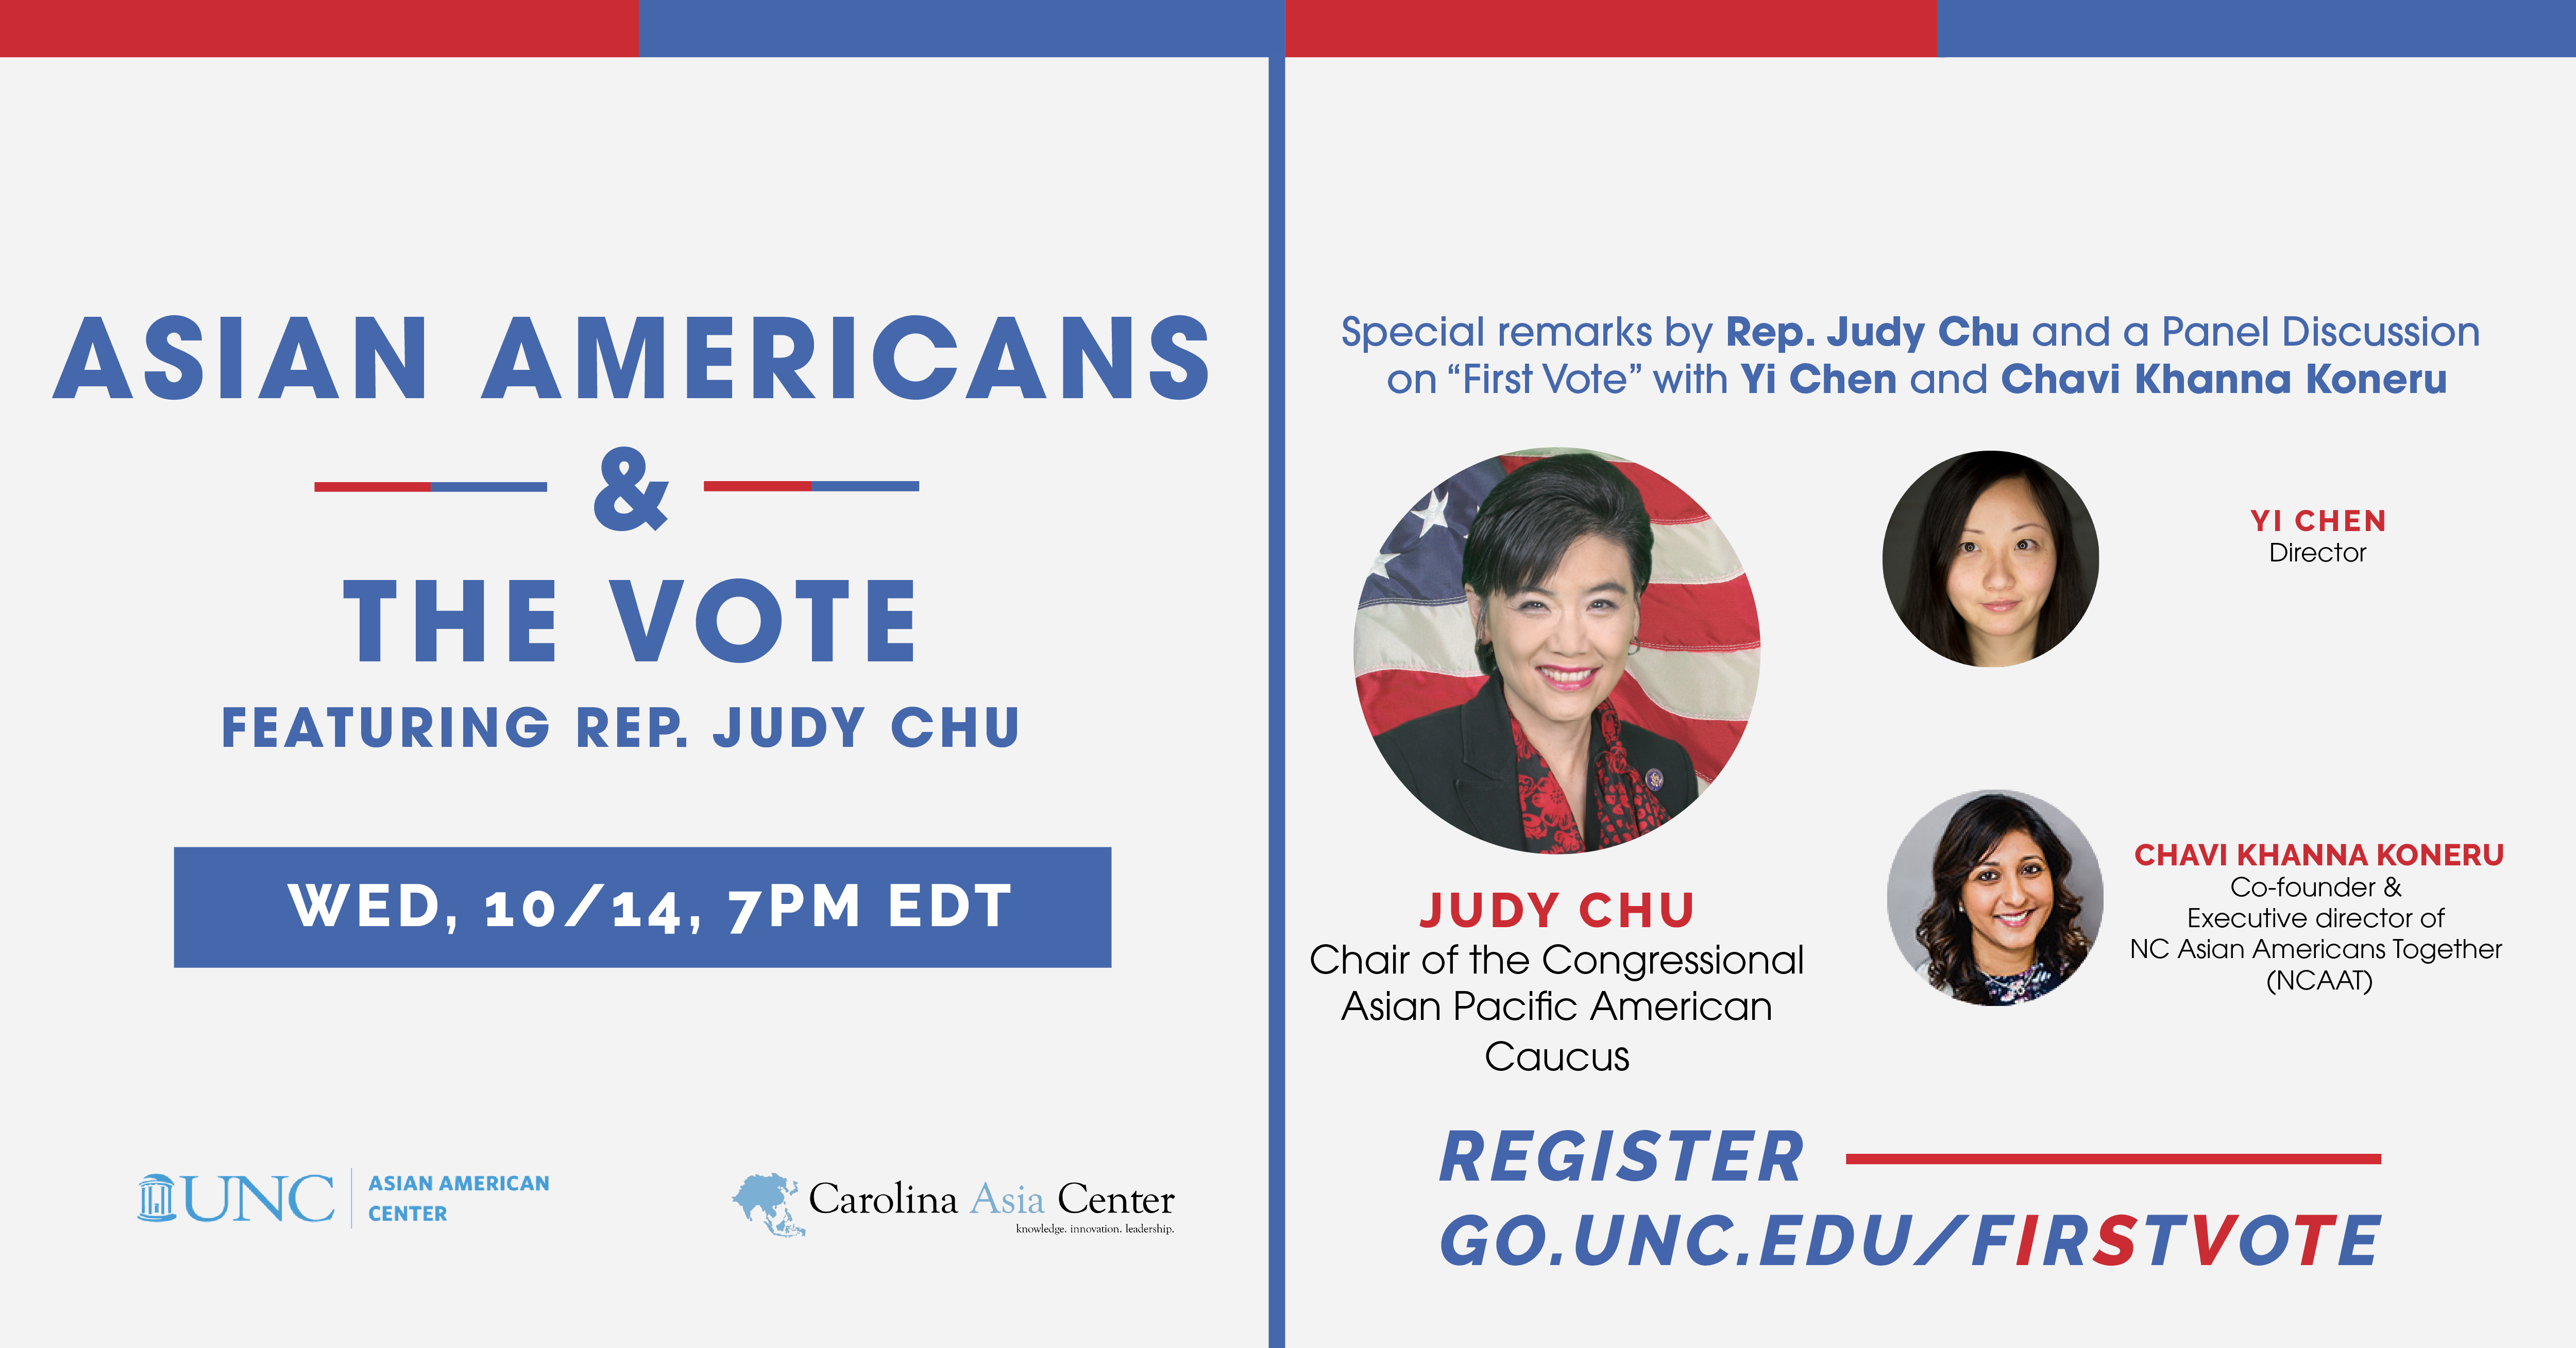 Asian Americans and the Vote Featuring Rep. Judy Chu